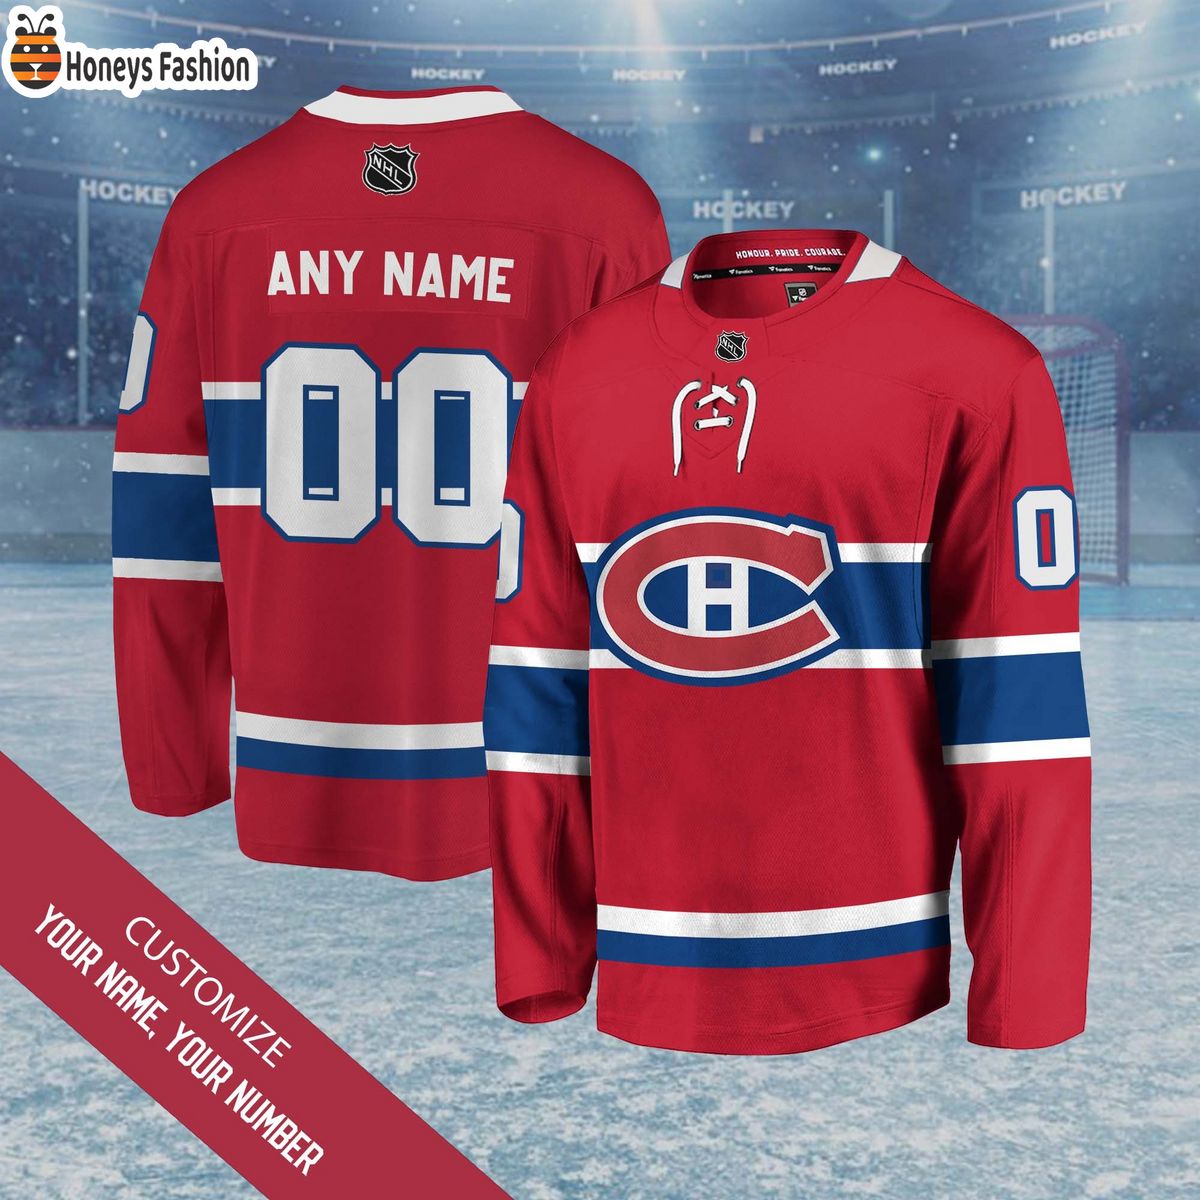 Montreal Canadiens Personalized Hockey Jersey